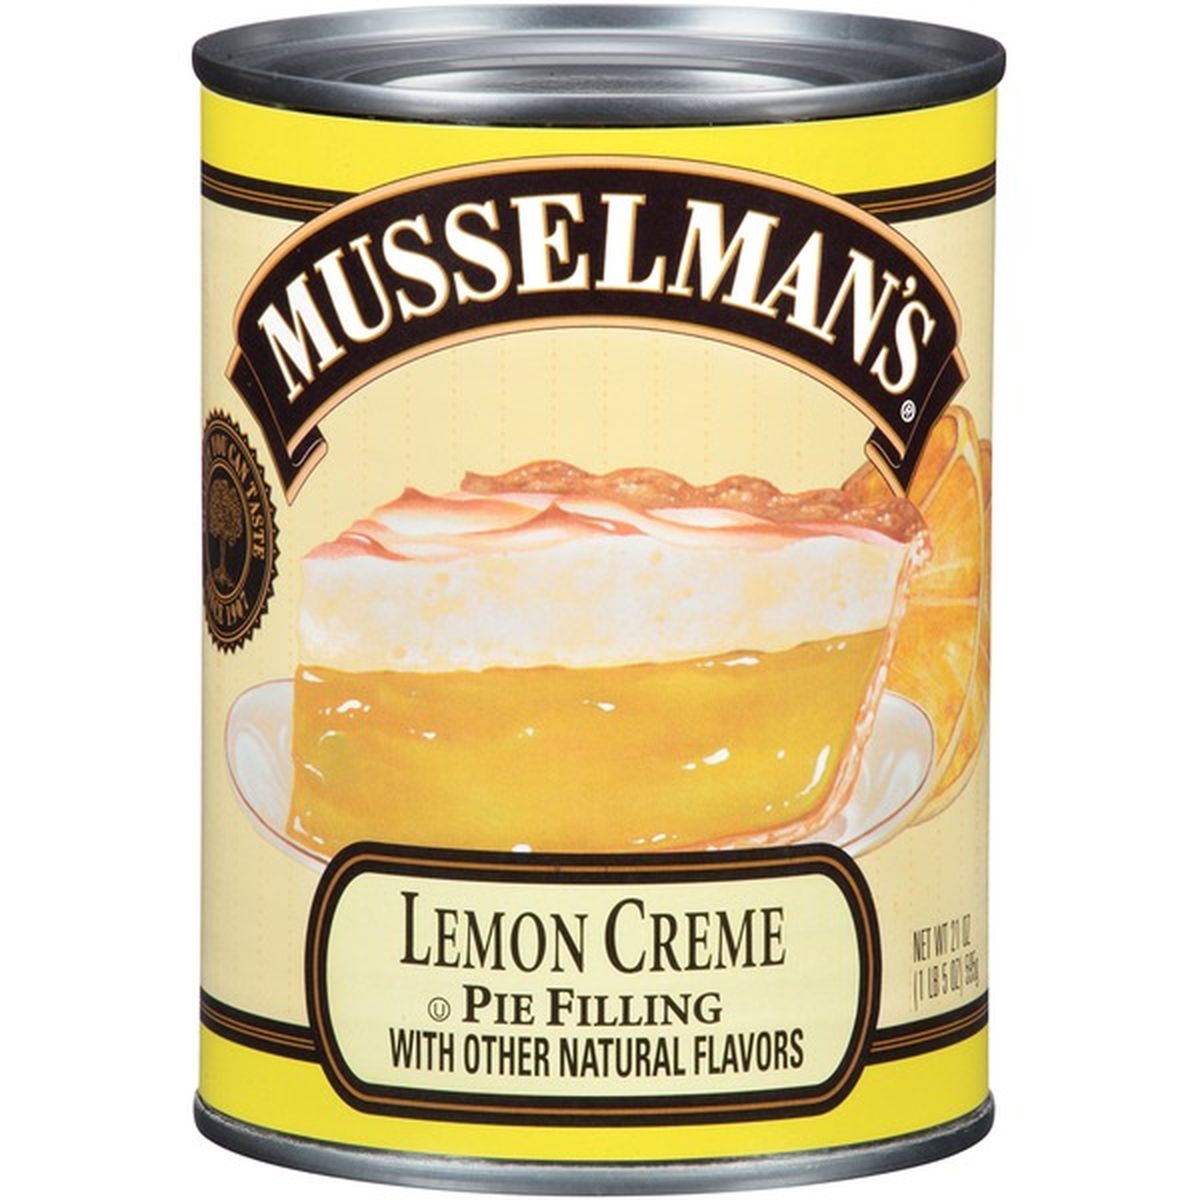 Comstock, Lemon Creme Pie Filling and Topping, 21oz Can (Pack of 3)